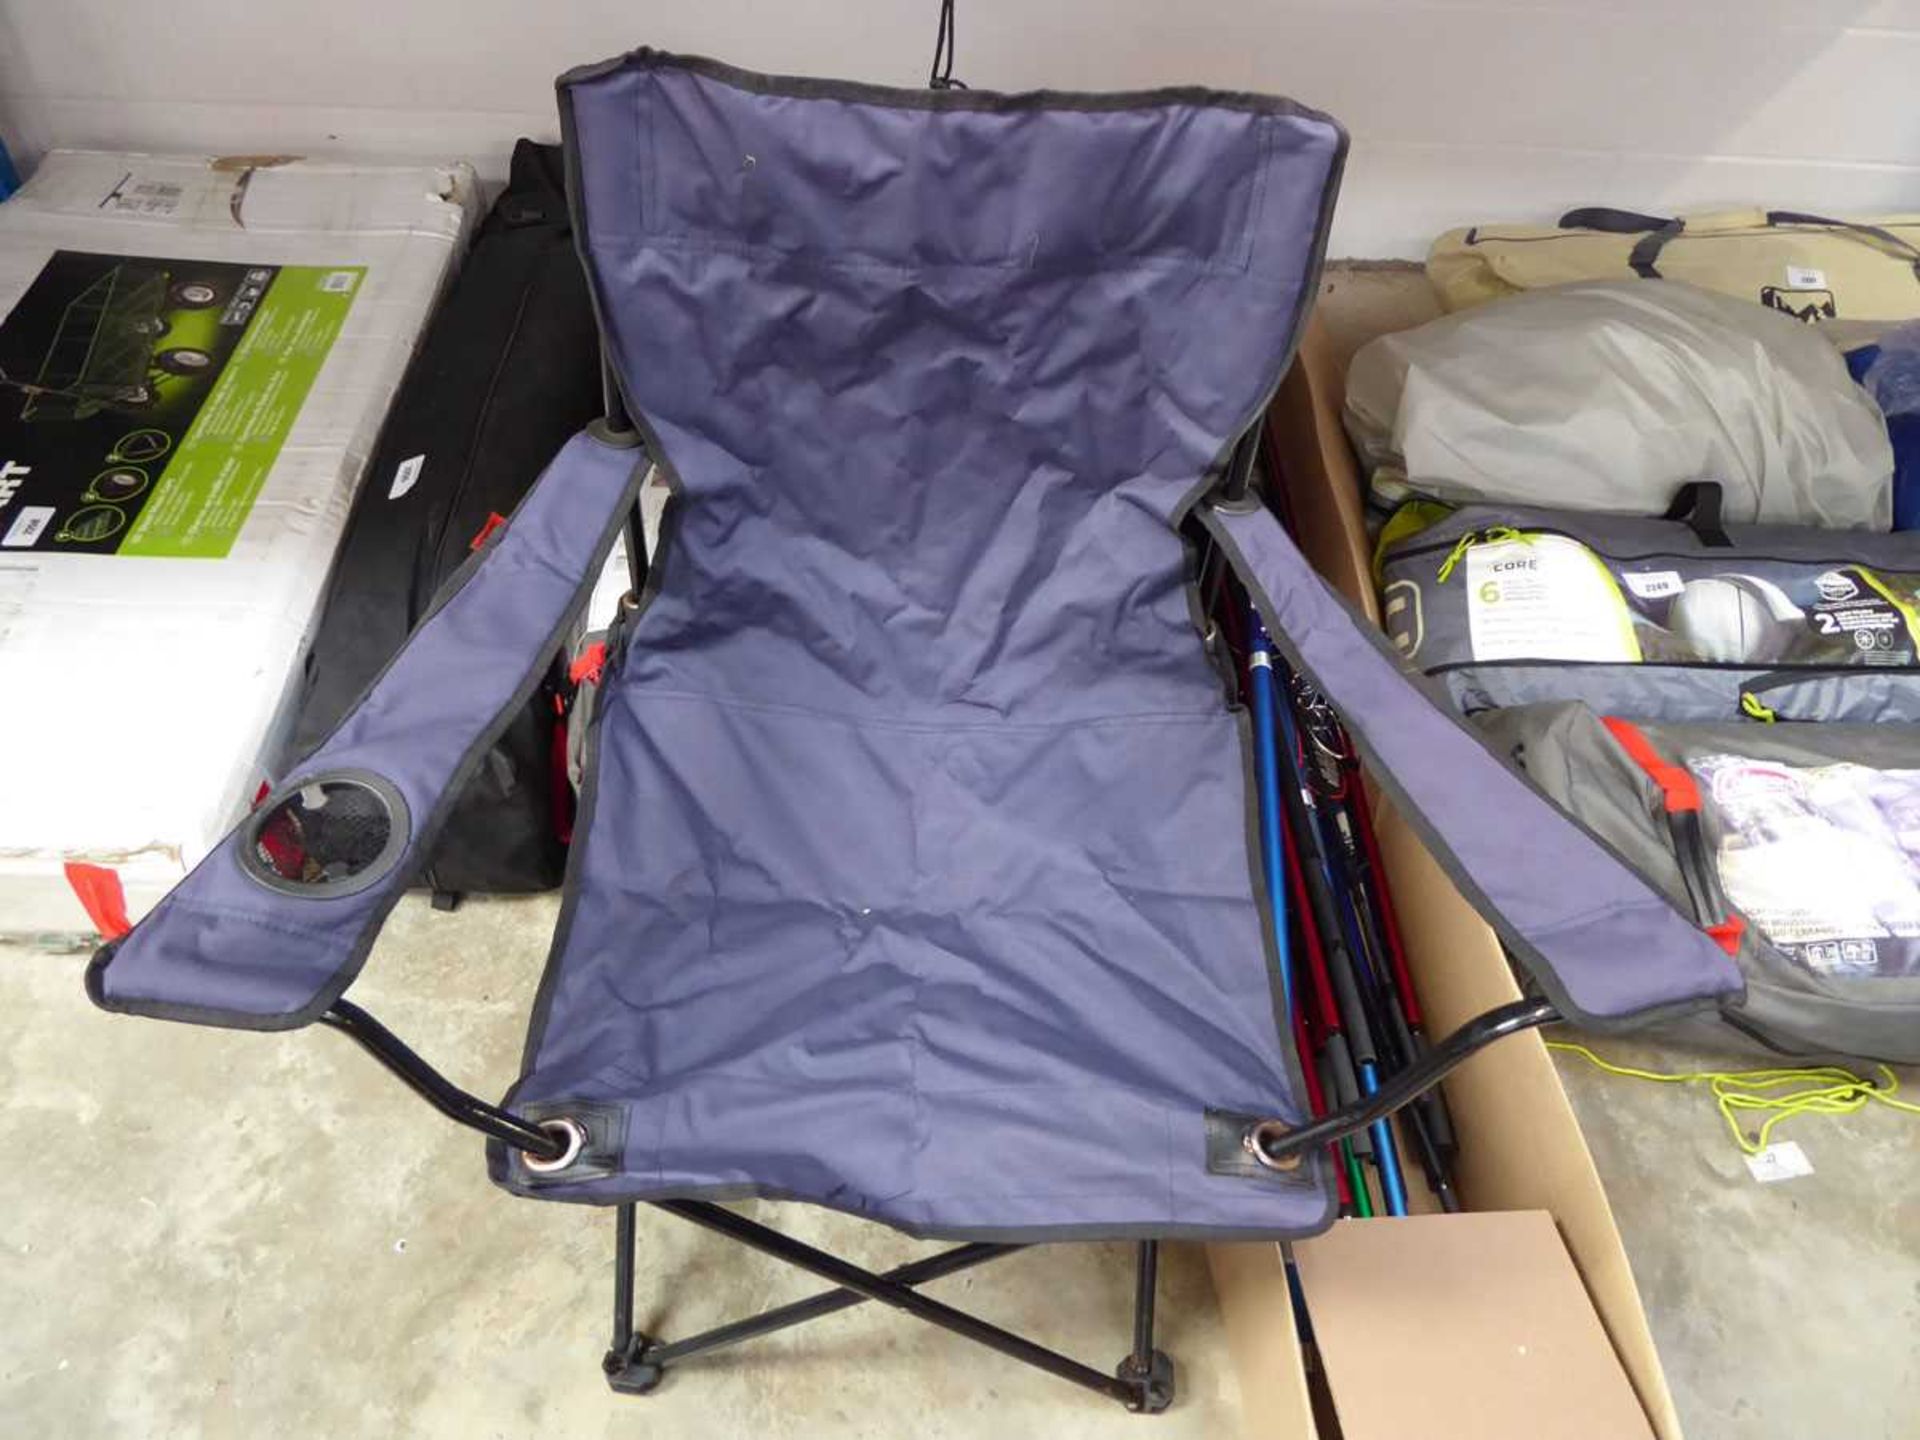 5 collapsible camping chairs - Image 3 of 3